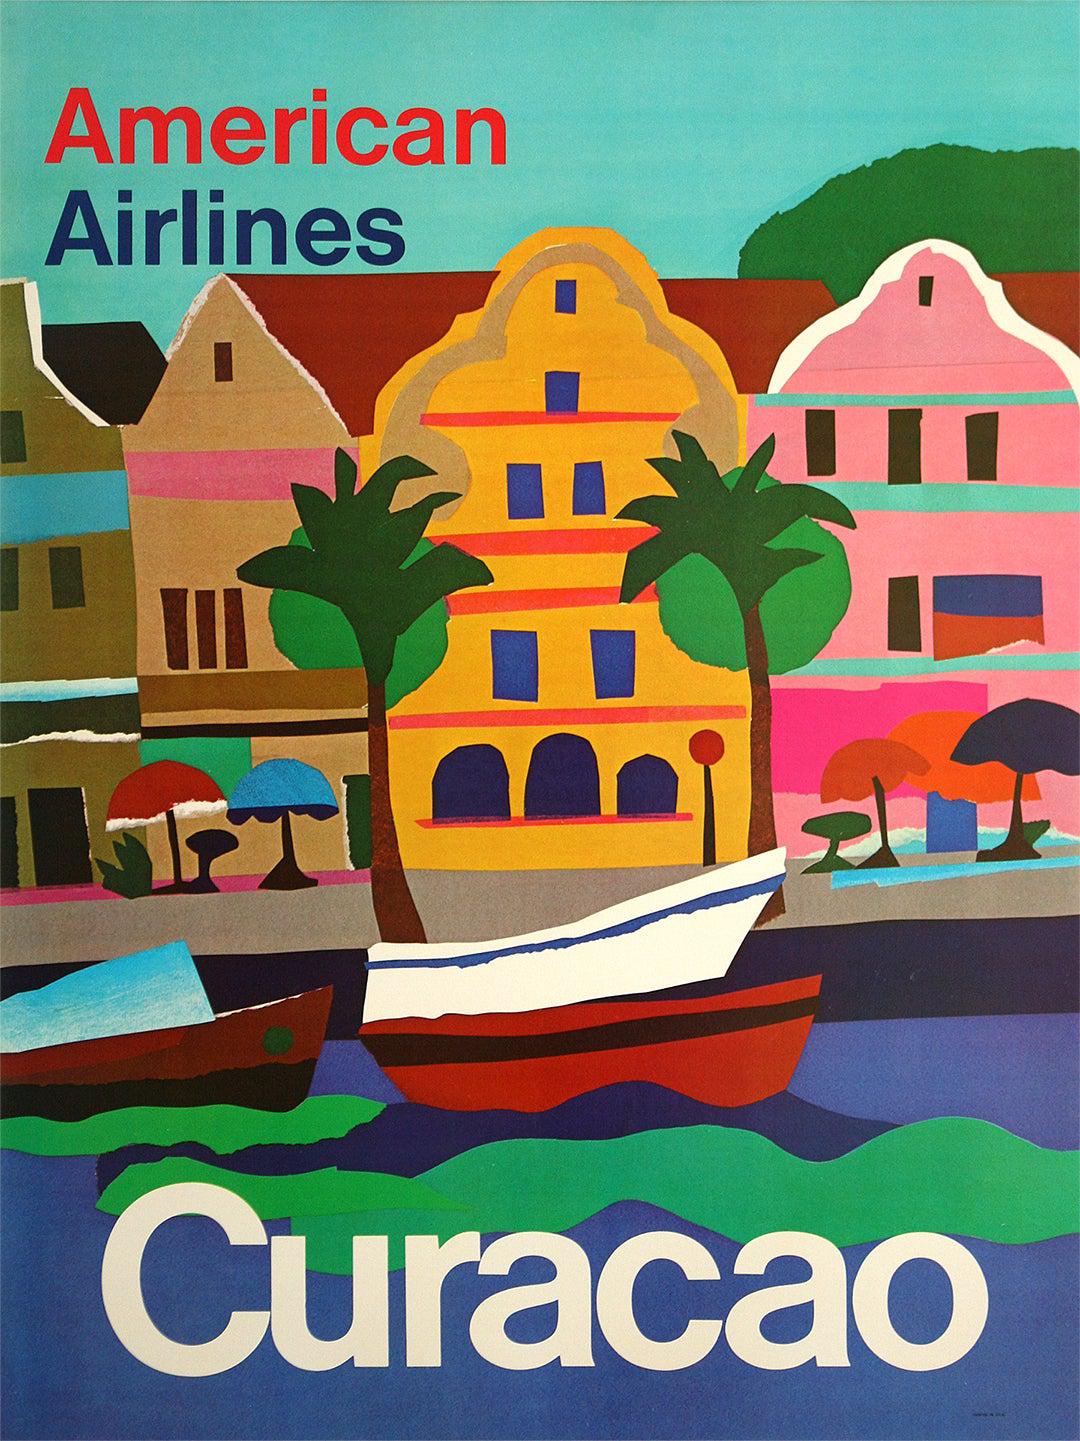 Original Vintage American Airlines Curacao Travel Poster c1970